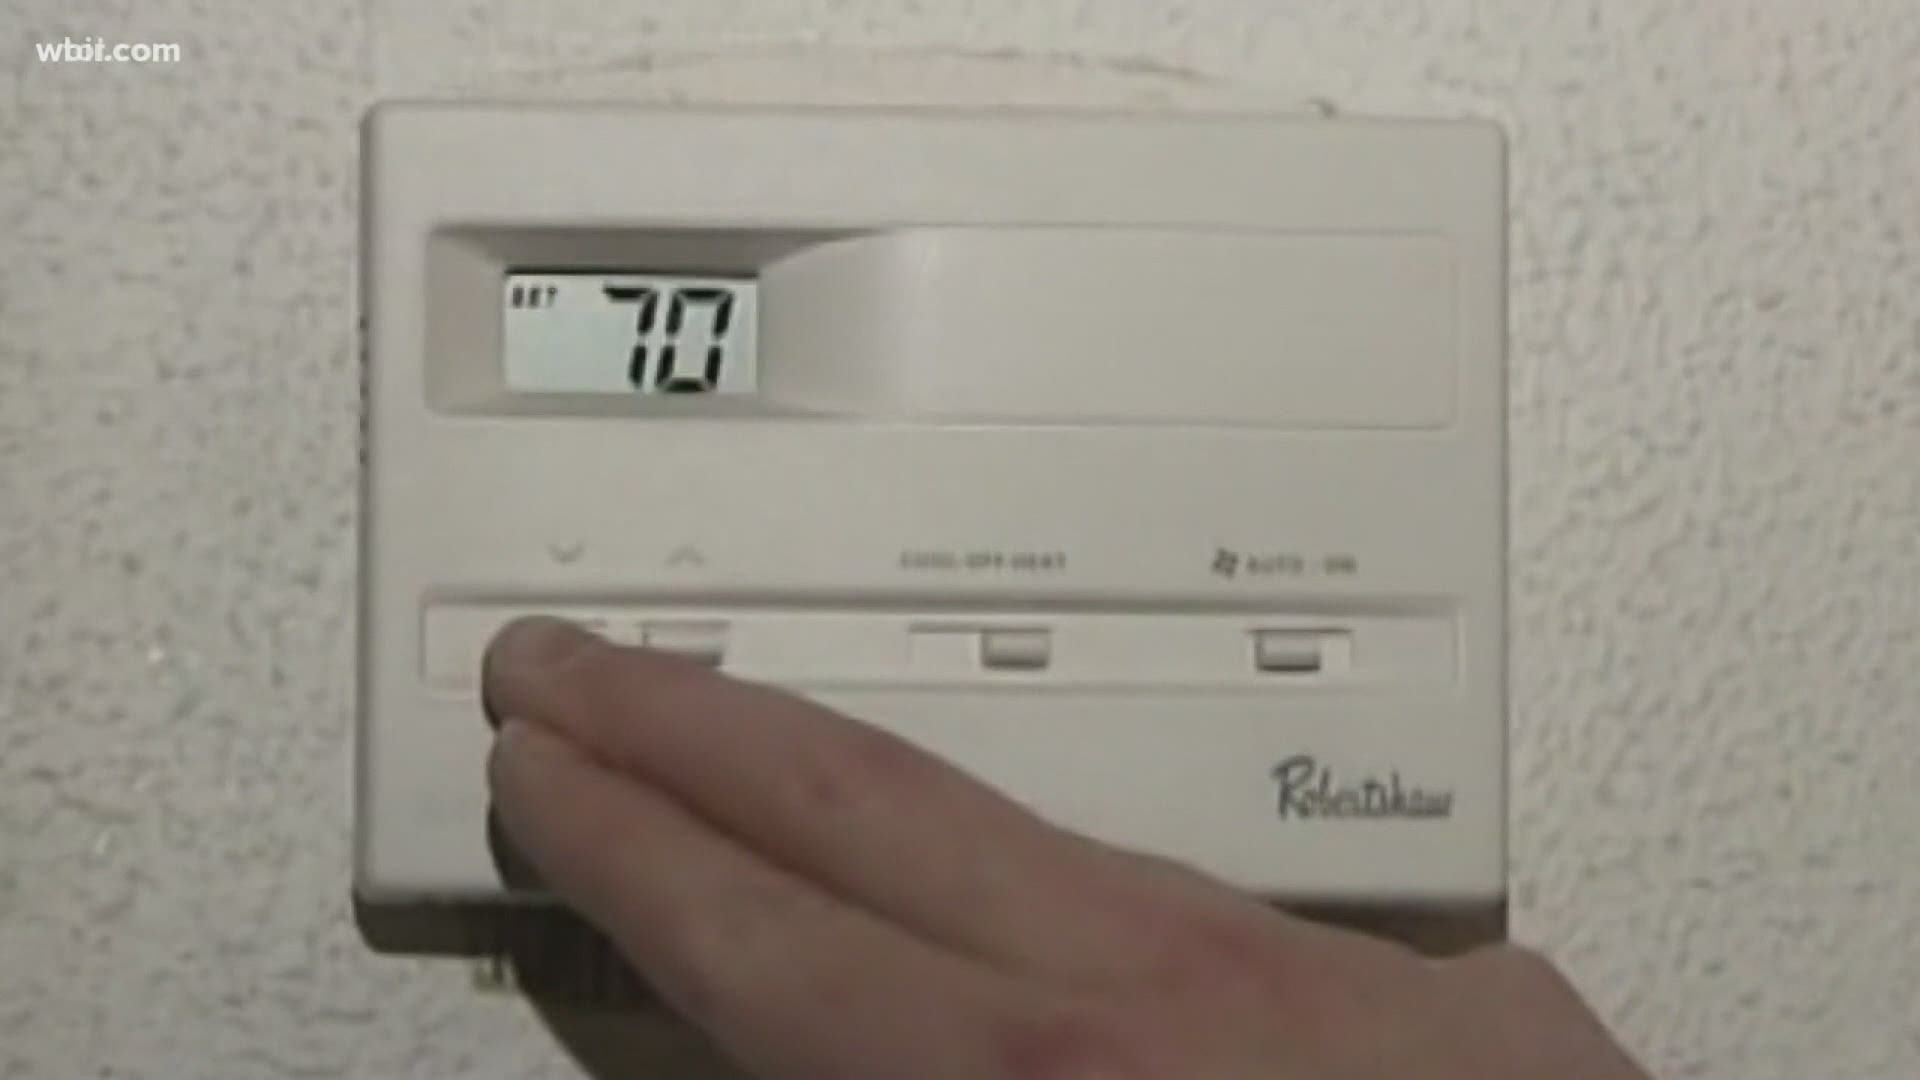 Temperatures are going to get back up near 90 degrees Fahrenheit, which means more money spent on air conditioning.